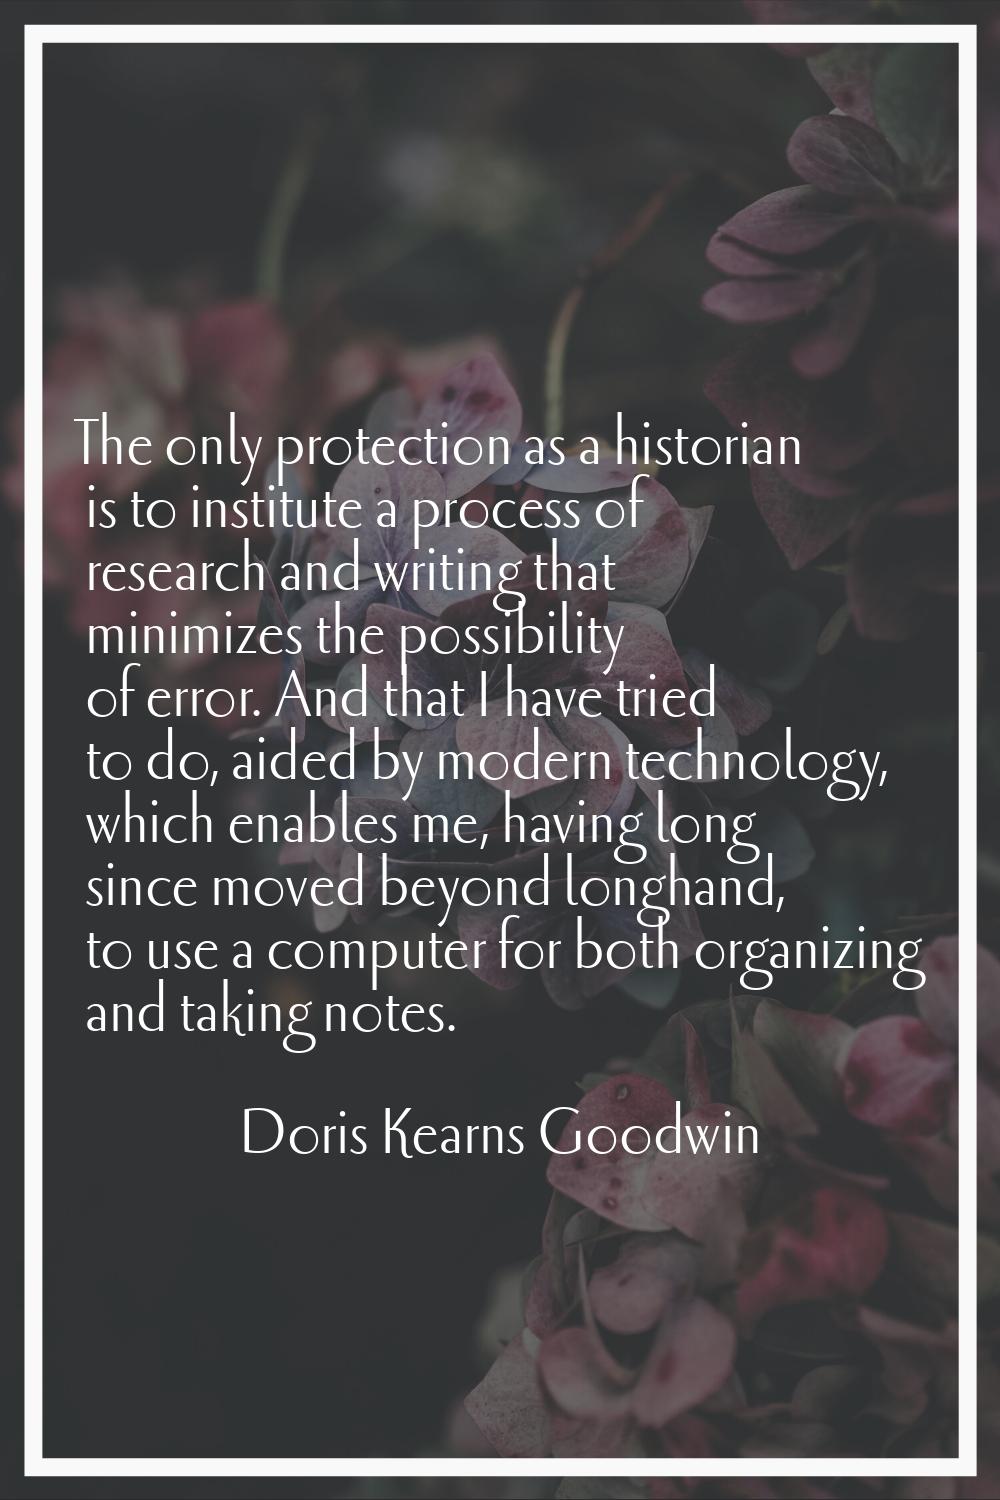 The only protection as a historian is to institute a process of research and writing that minimizes